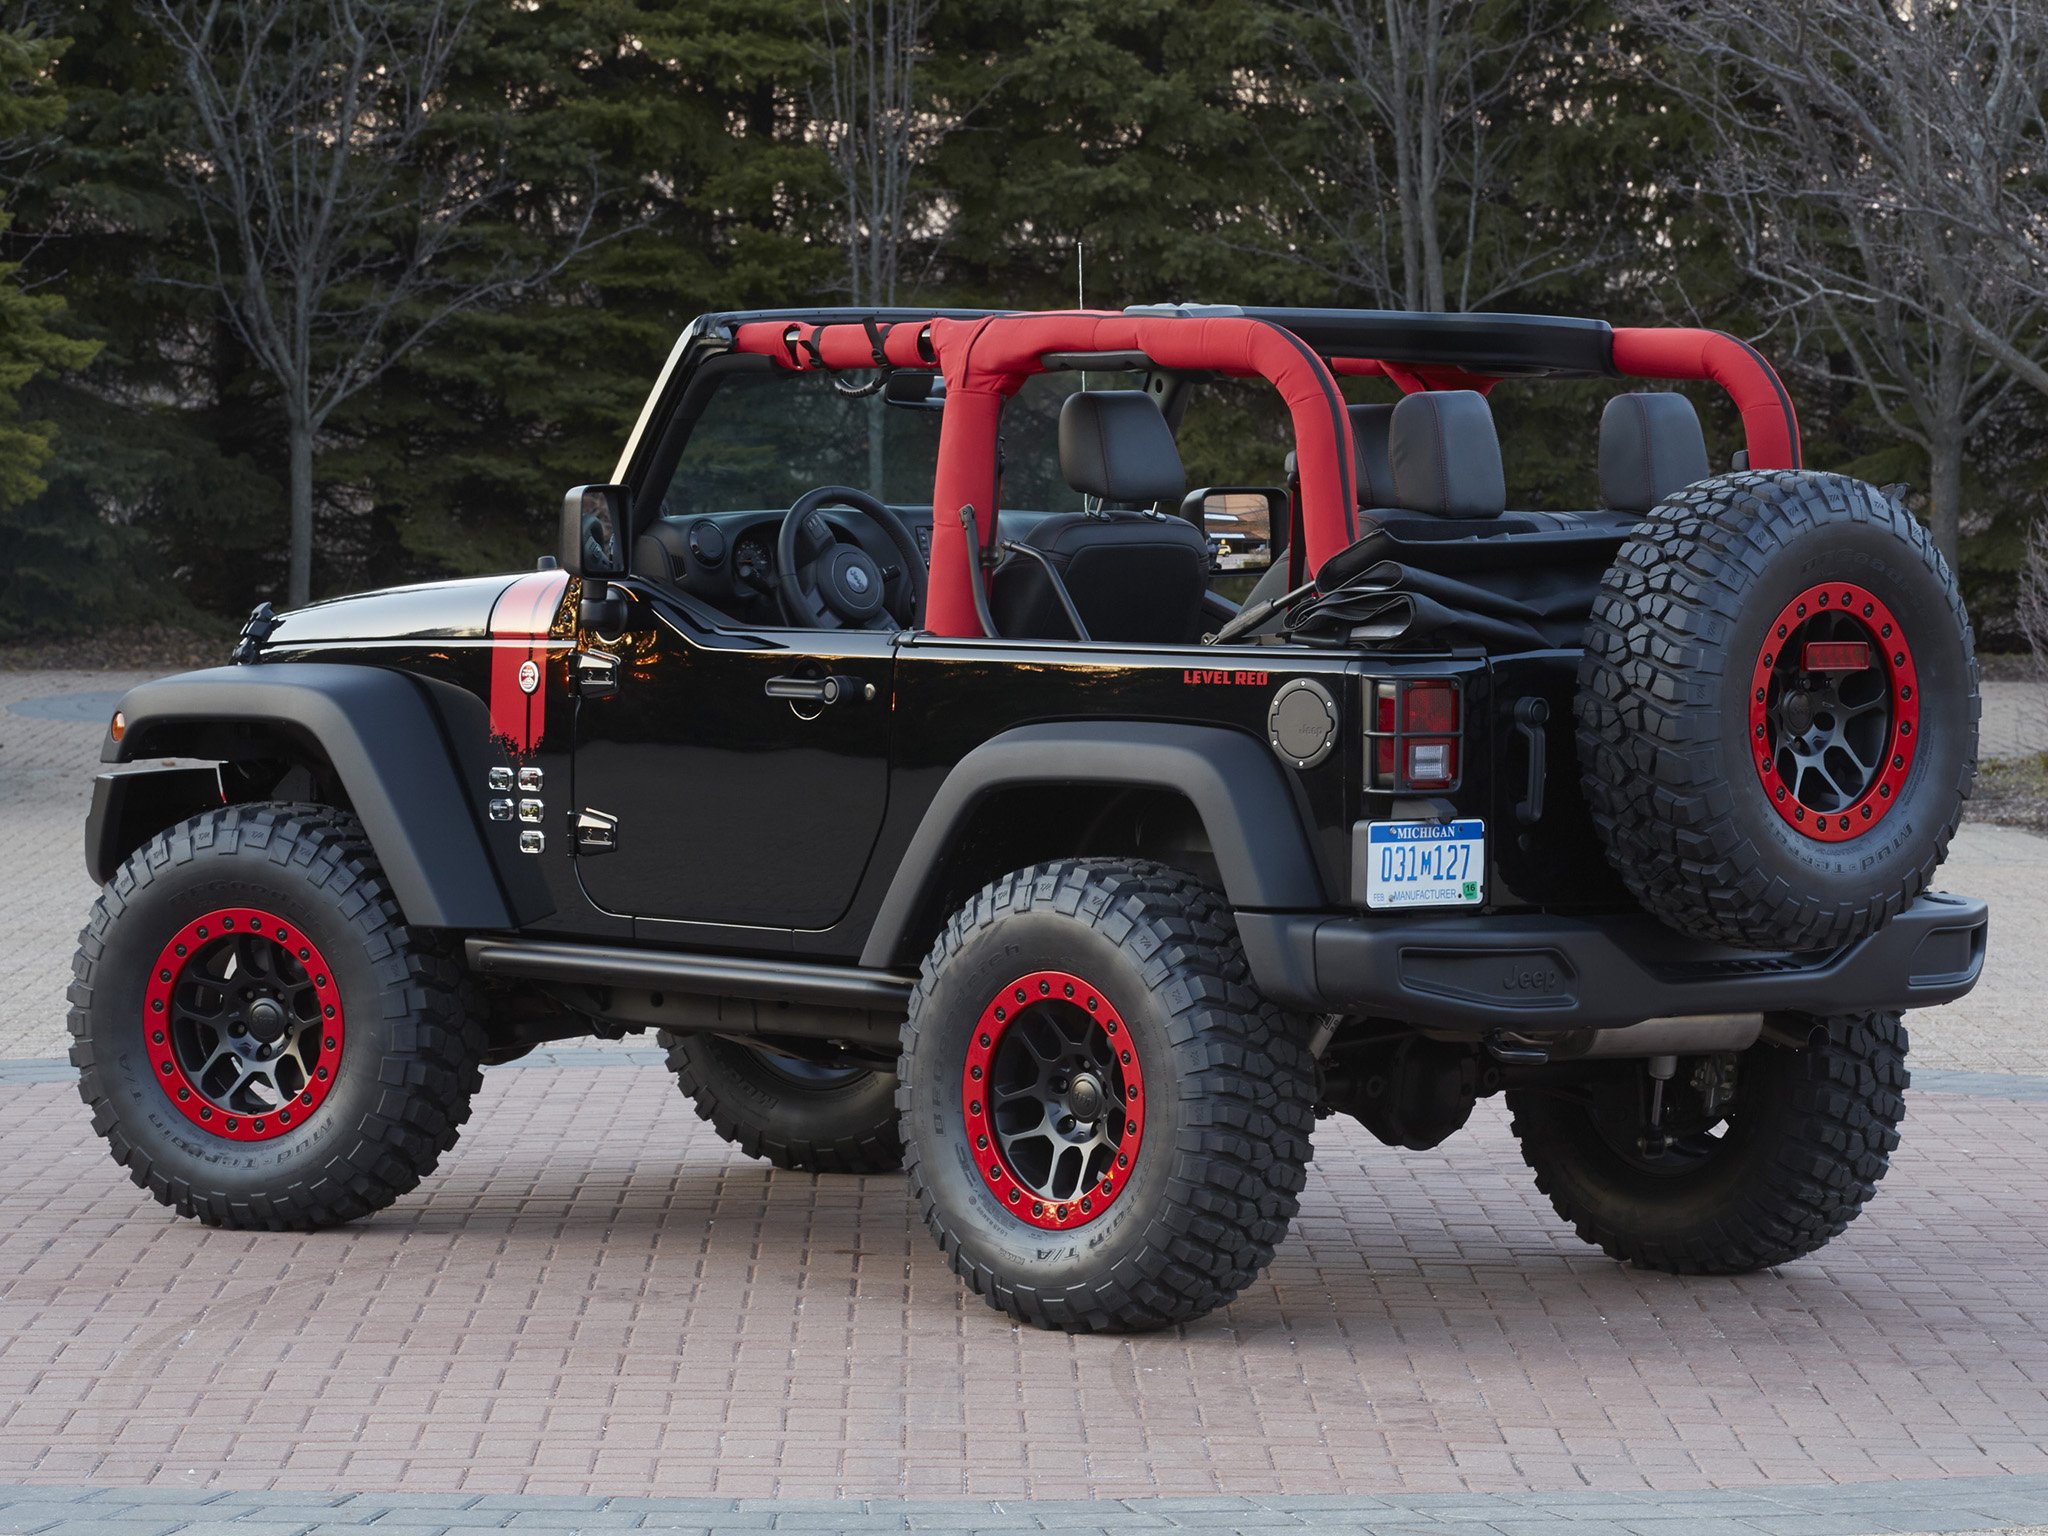 2014, Jeep, Wrangler, Level, Red, Concept,  j k , 4x4, Suv, Tuning Wallpaper